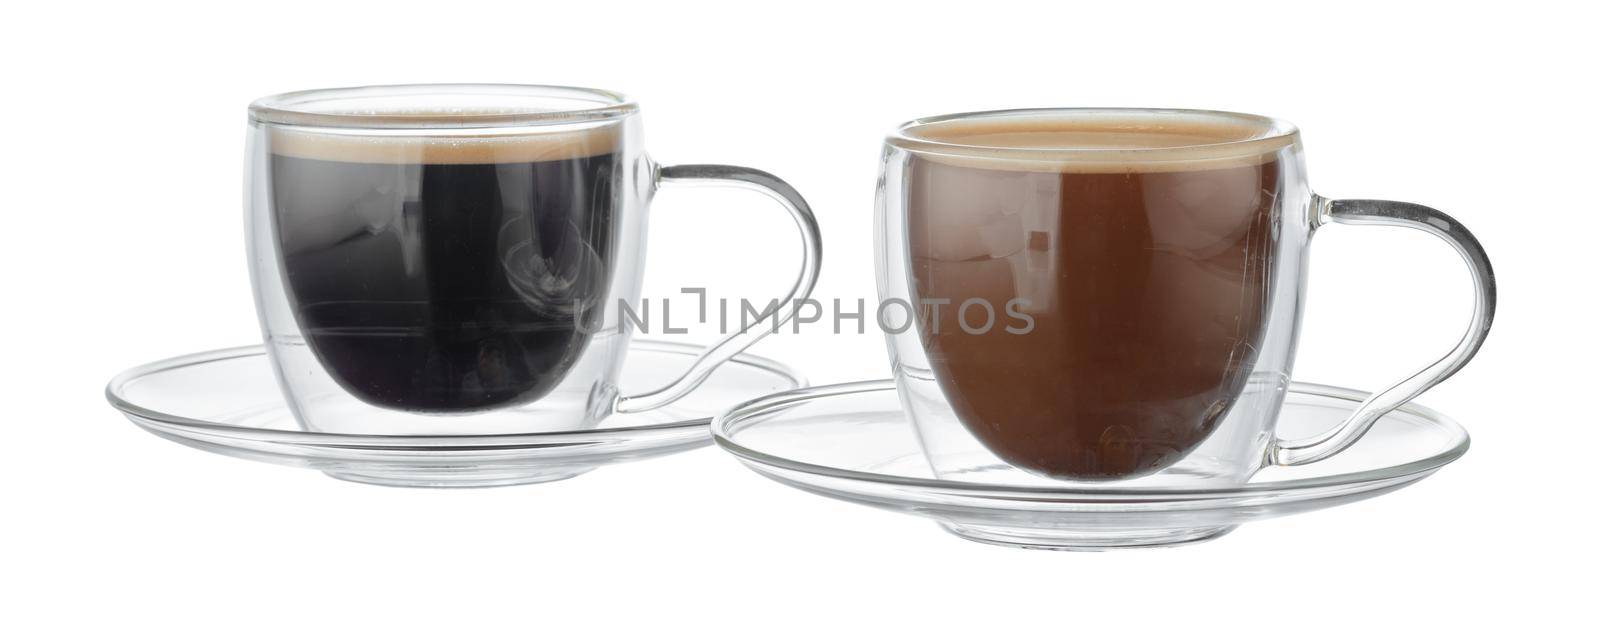 Glass cup of coffee isolated on white background